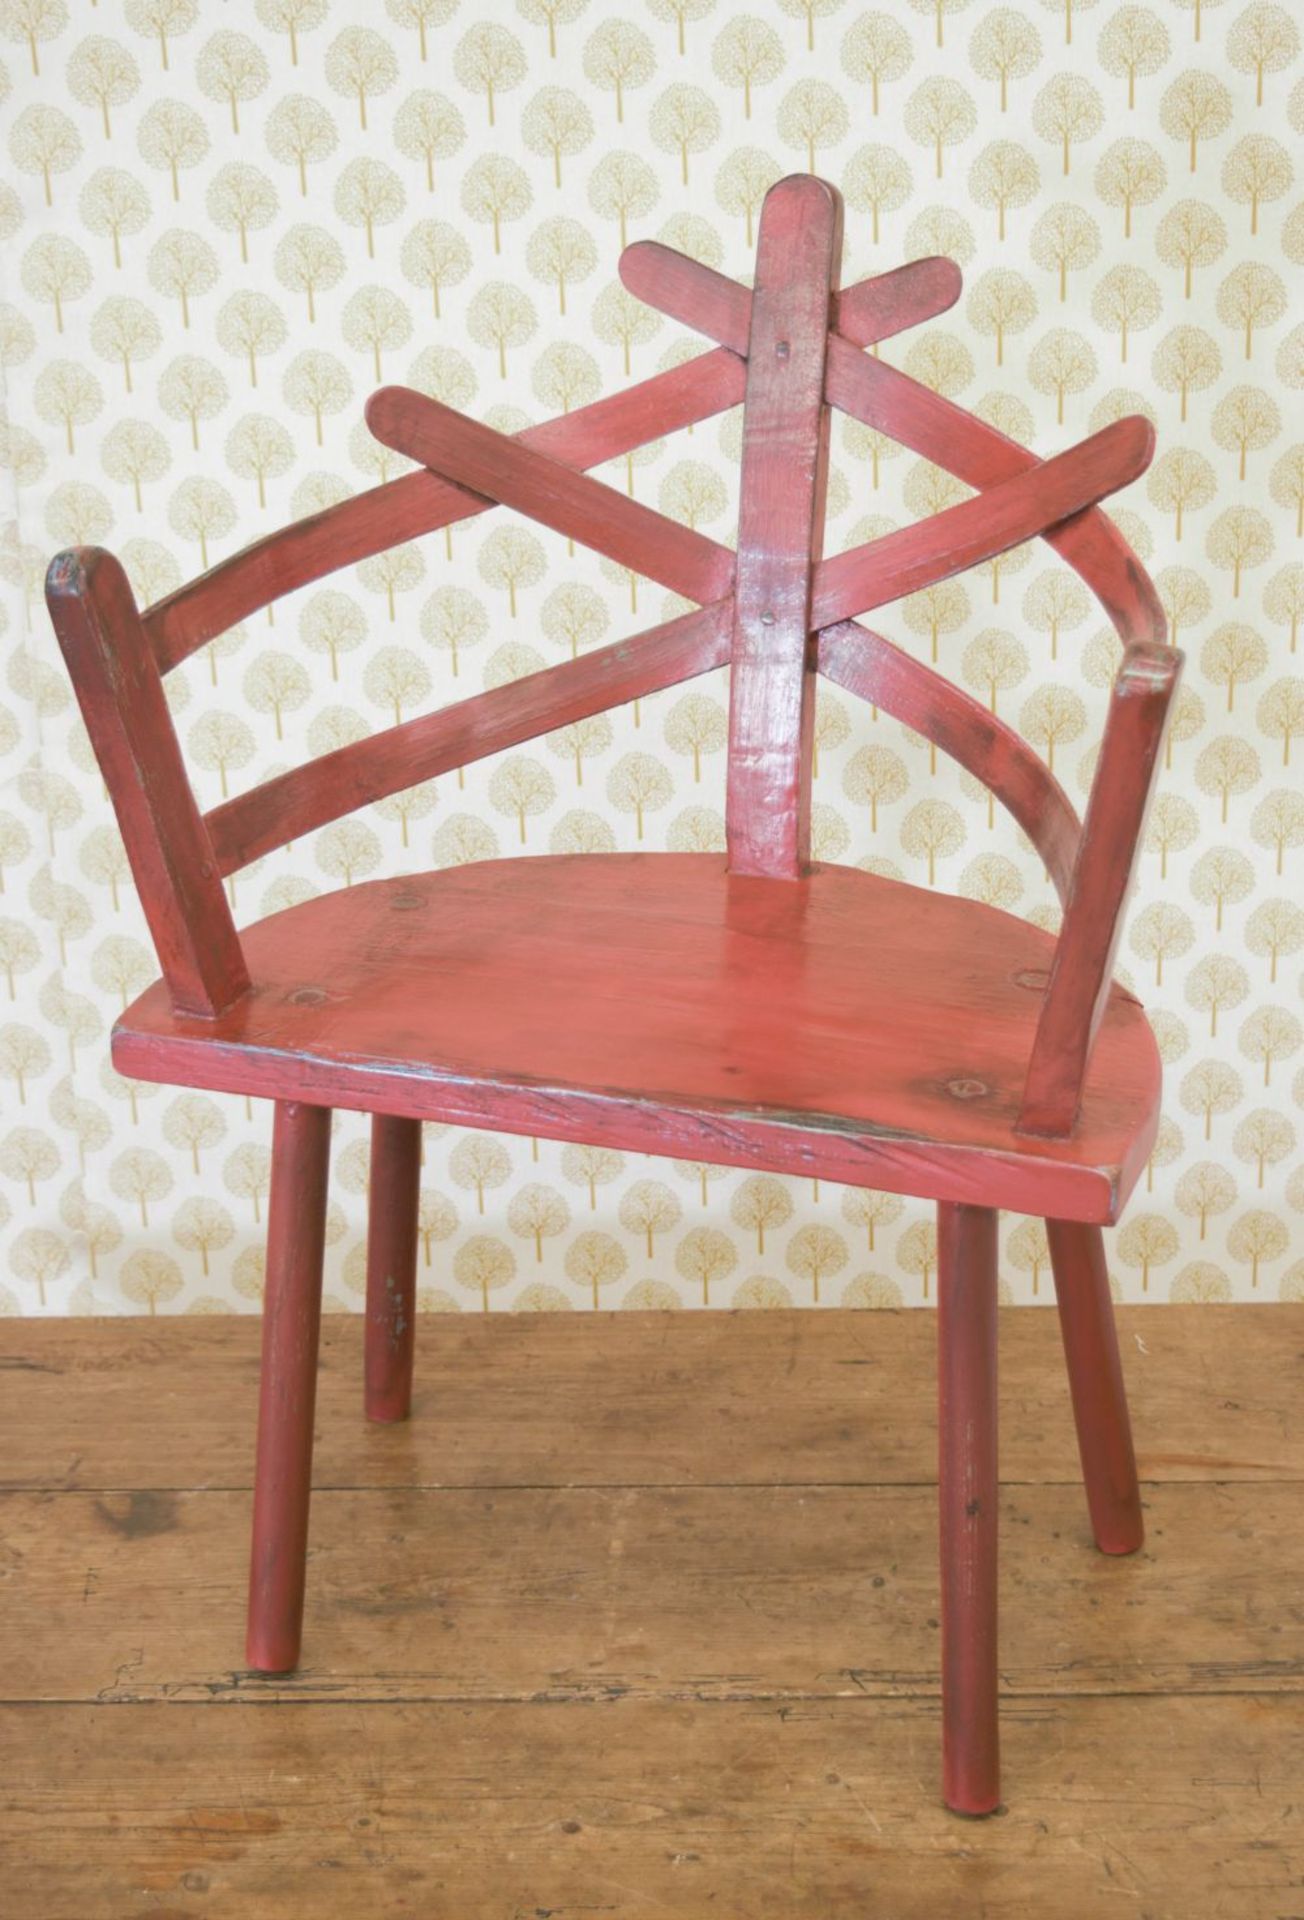 19TH-CENTURY ASH & ELM BOAT BUILDER'S CHAIR - Image 2 of 4